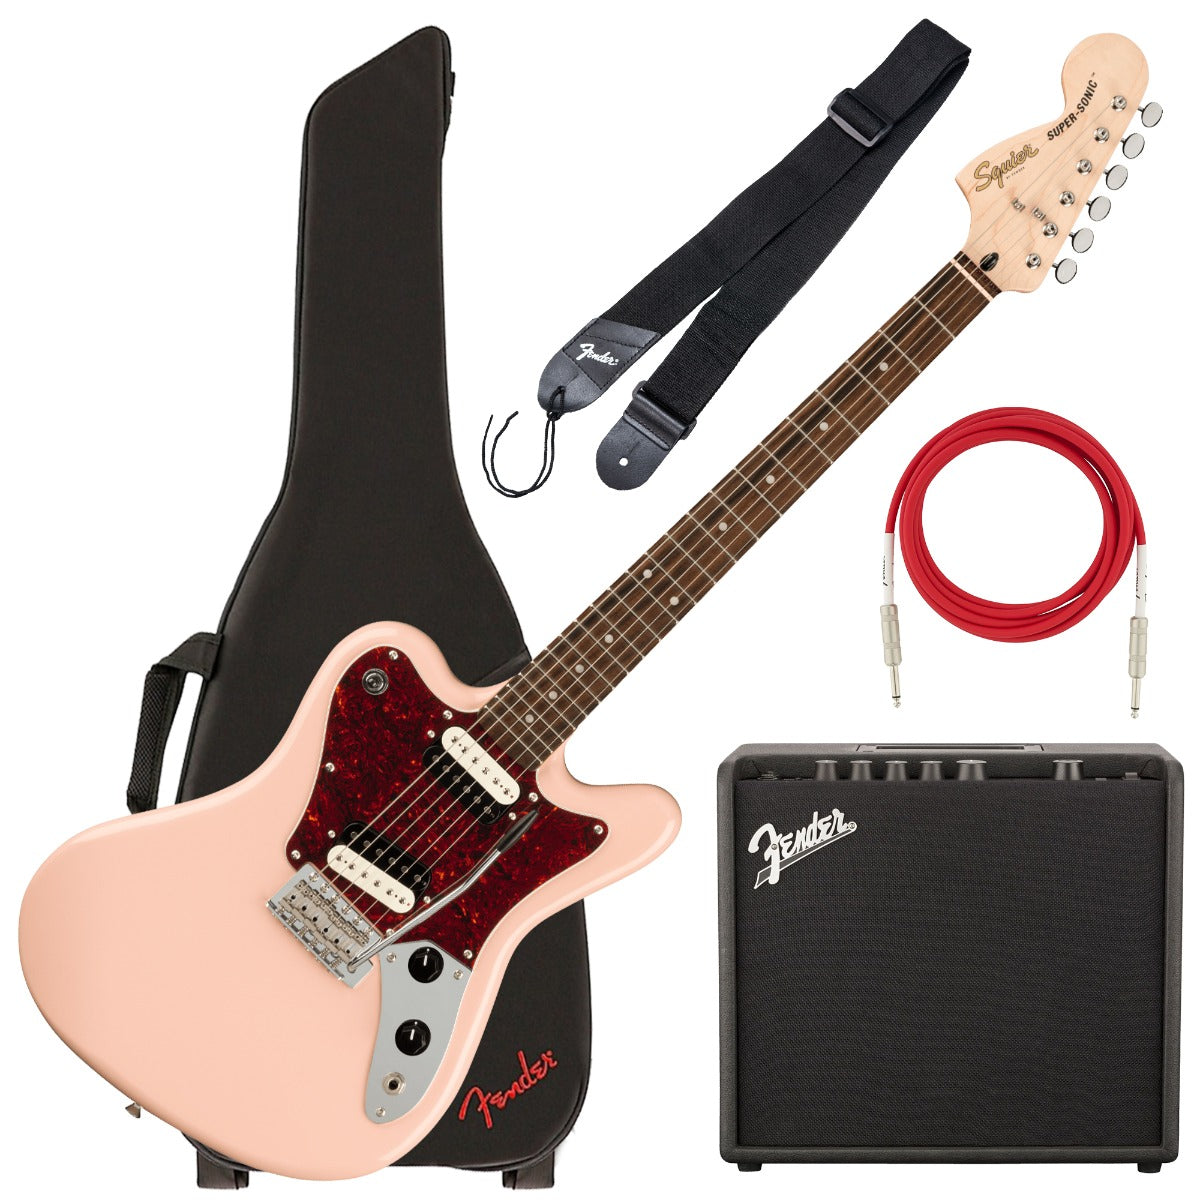 Squier Paranormal Super-Sonic - Laurel, Shell Pink COMPLETE GUITAR